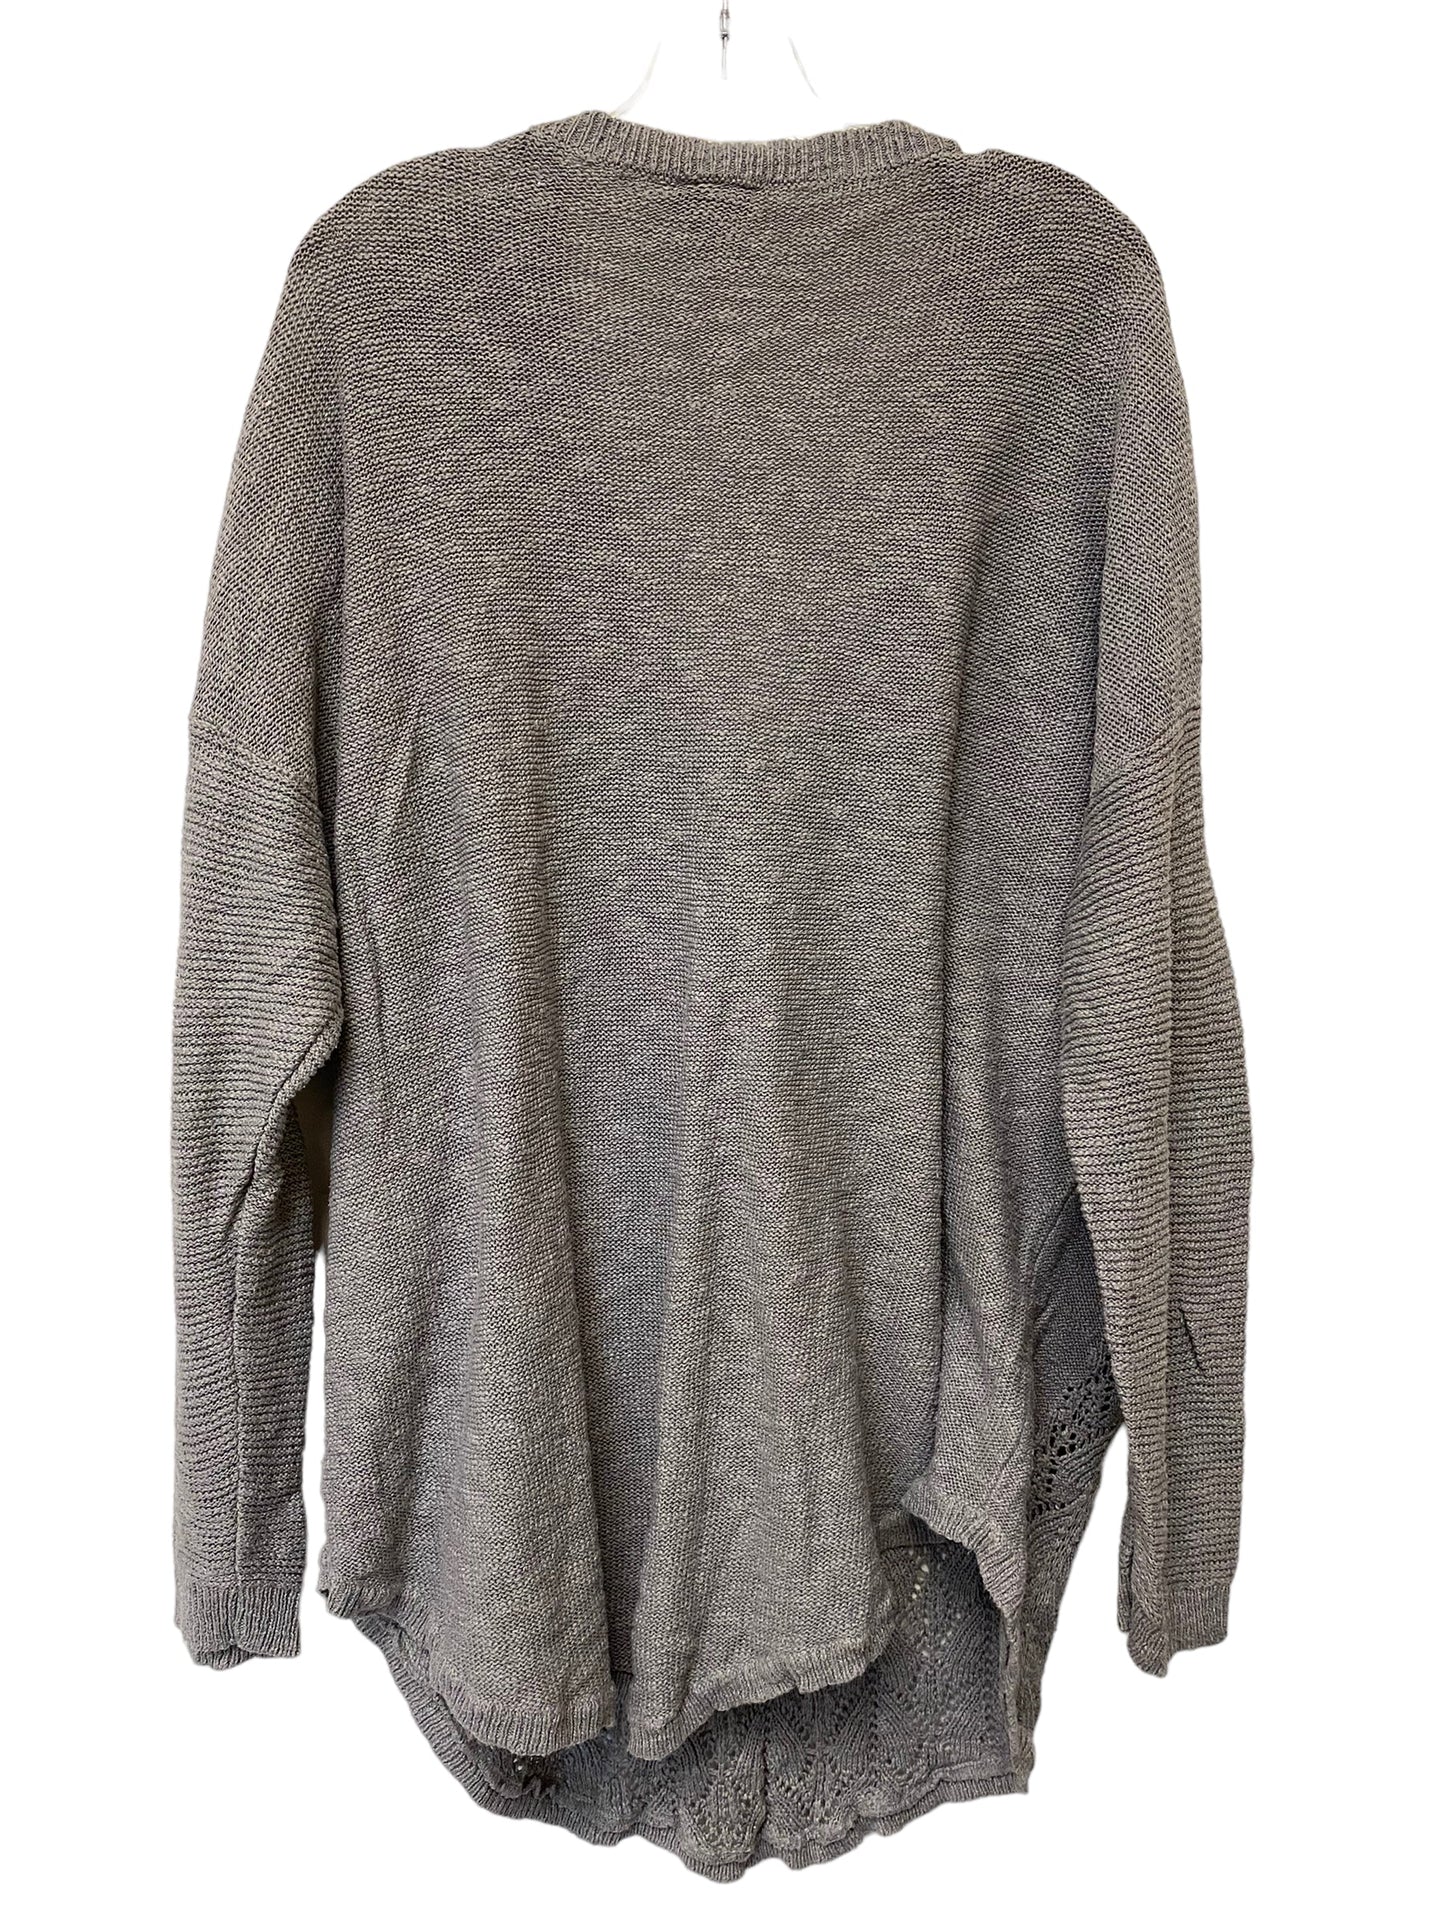 Sweater By Torrid  Size: 3